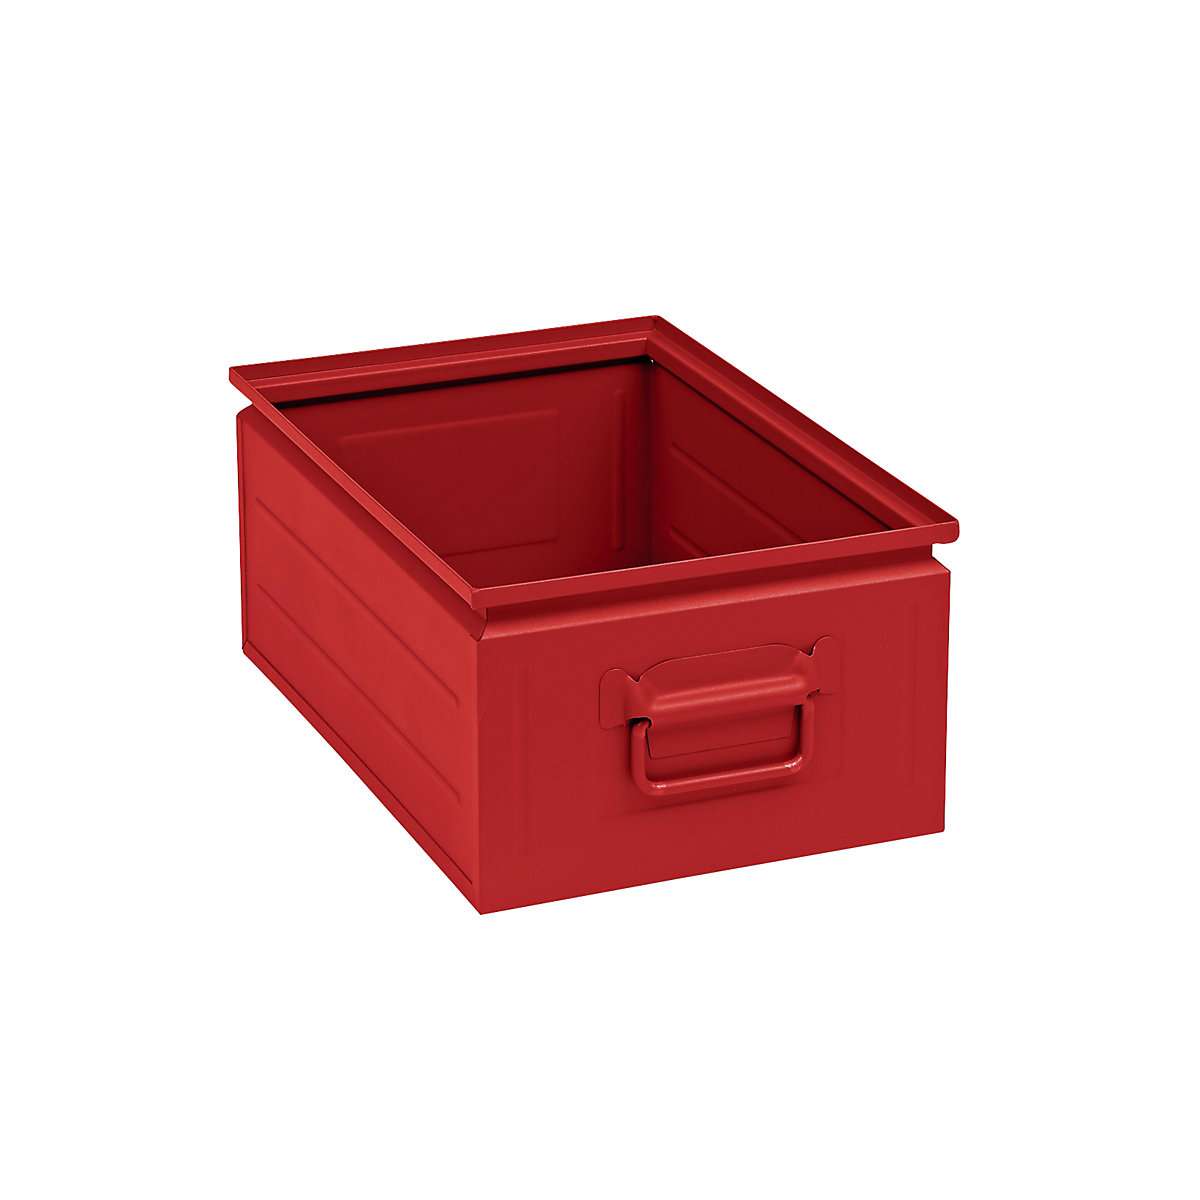 Stacking container made of sheet steel, capacity approx. 25 l, flame red RAL 3000